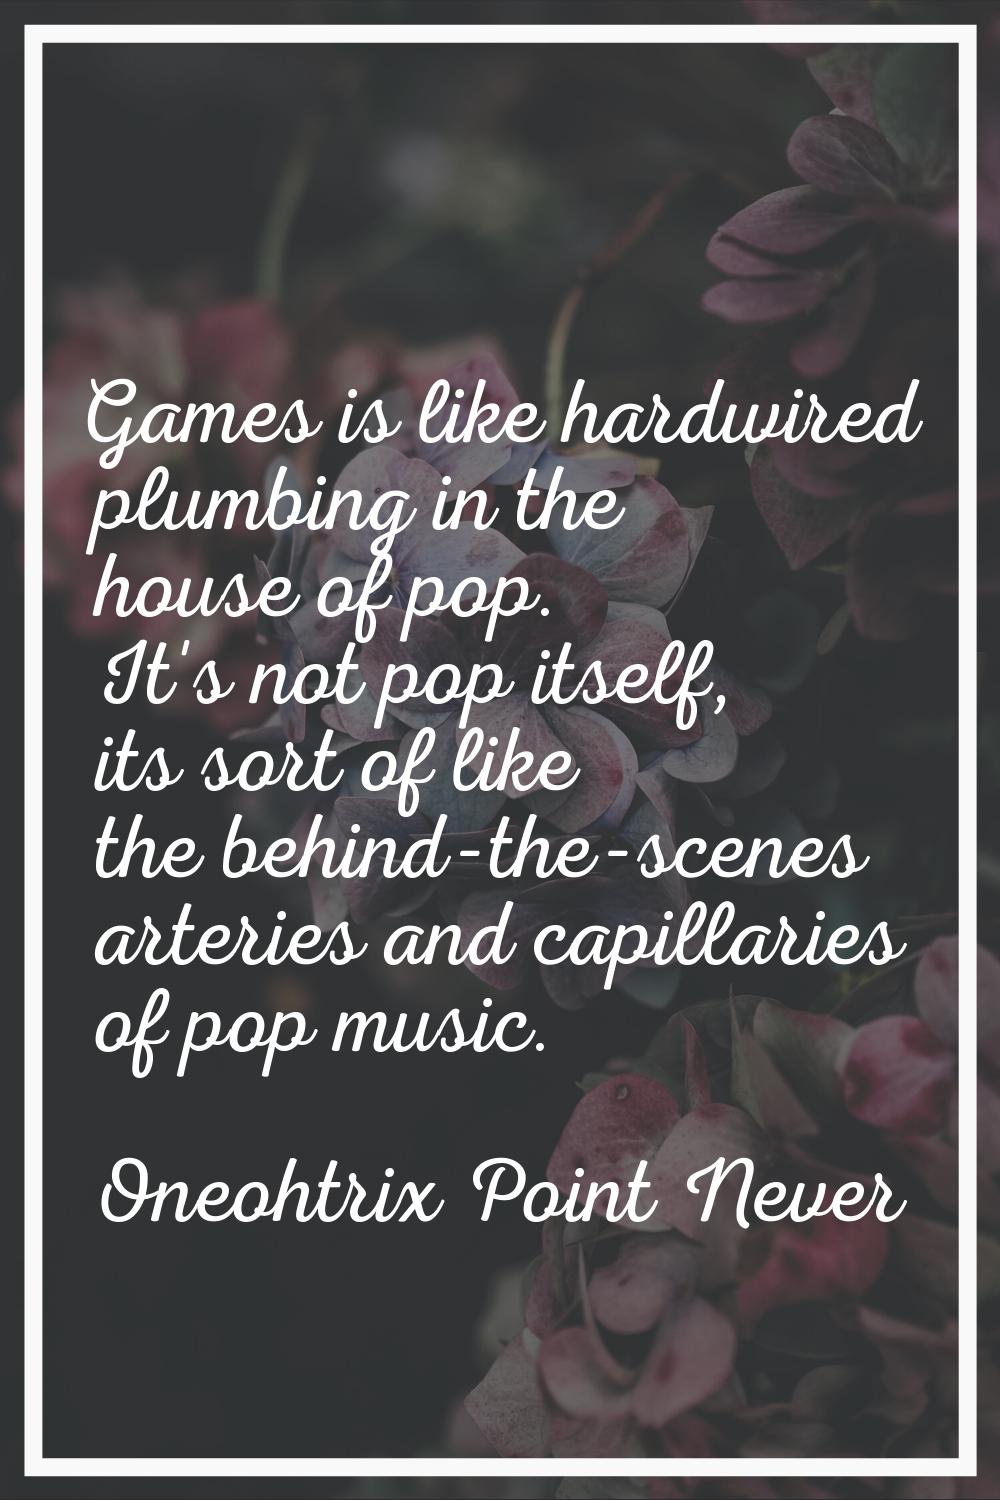 Games is like hardwired plumbing in the house of pop. It's not pop itself, its sort of like the beh